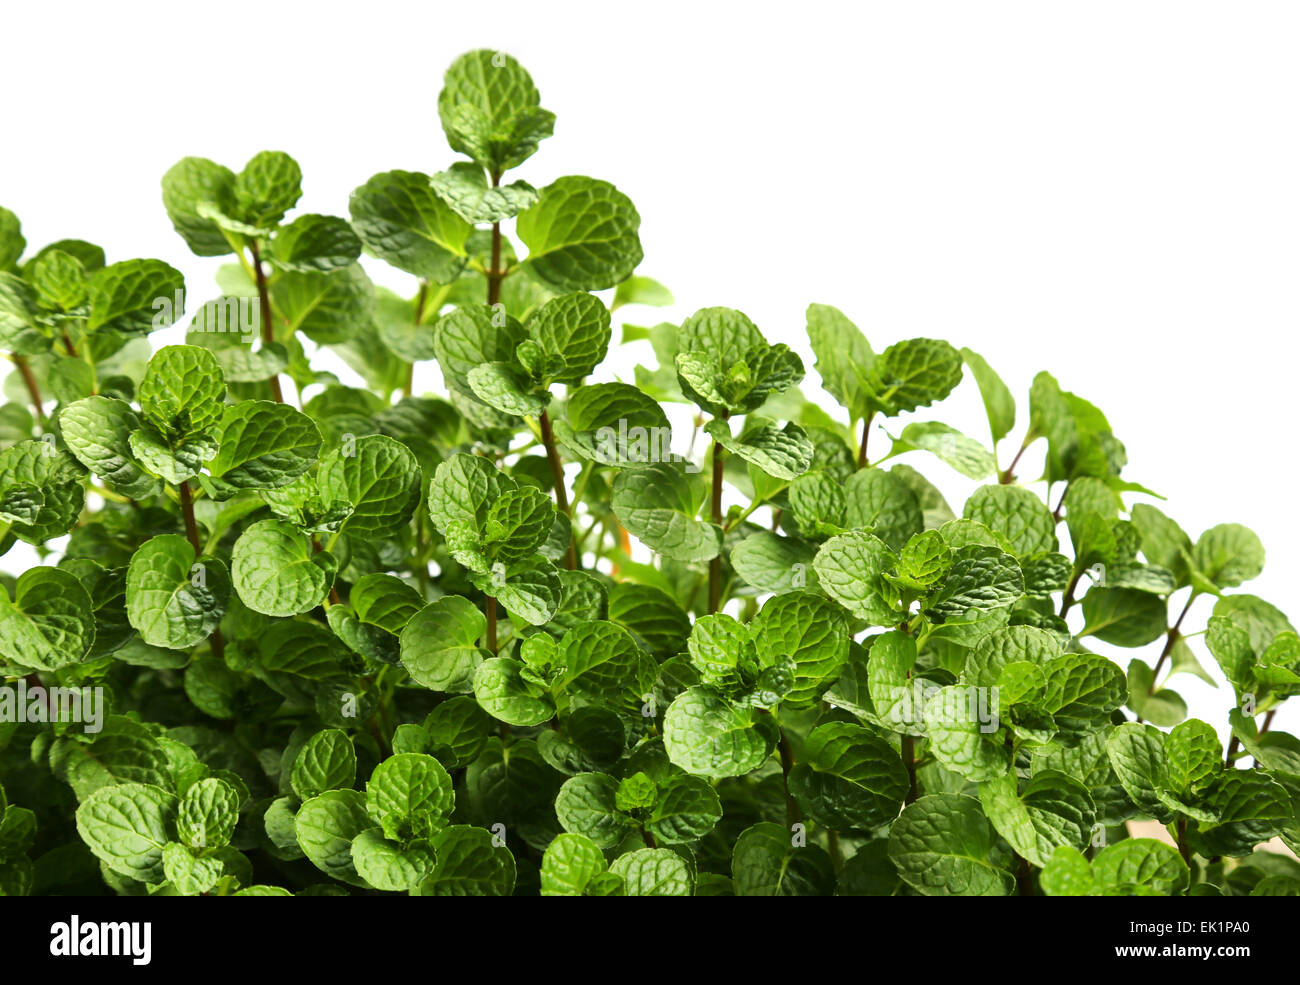 Mint leaves over white background Stock Photo